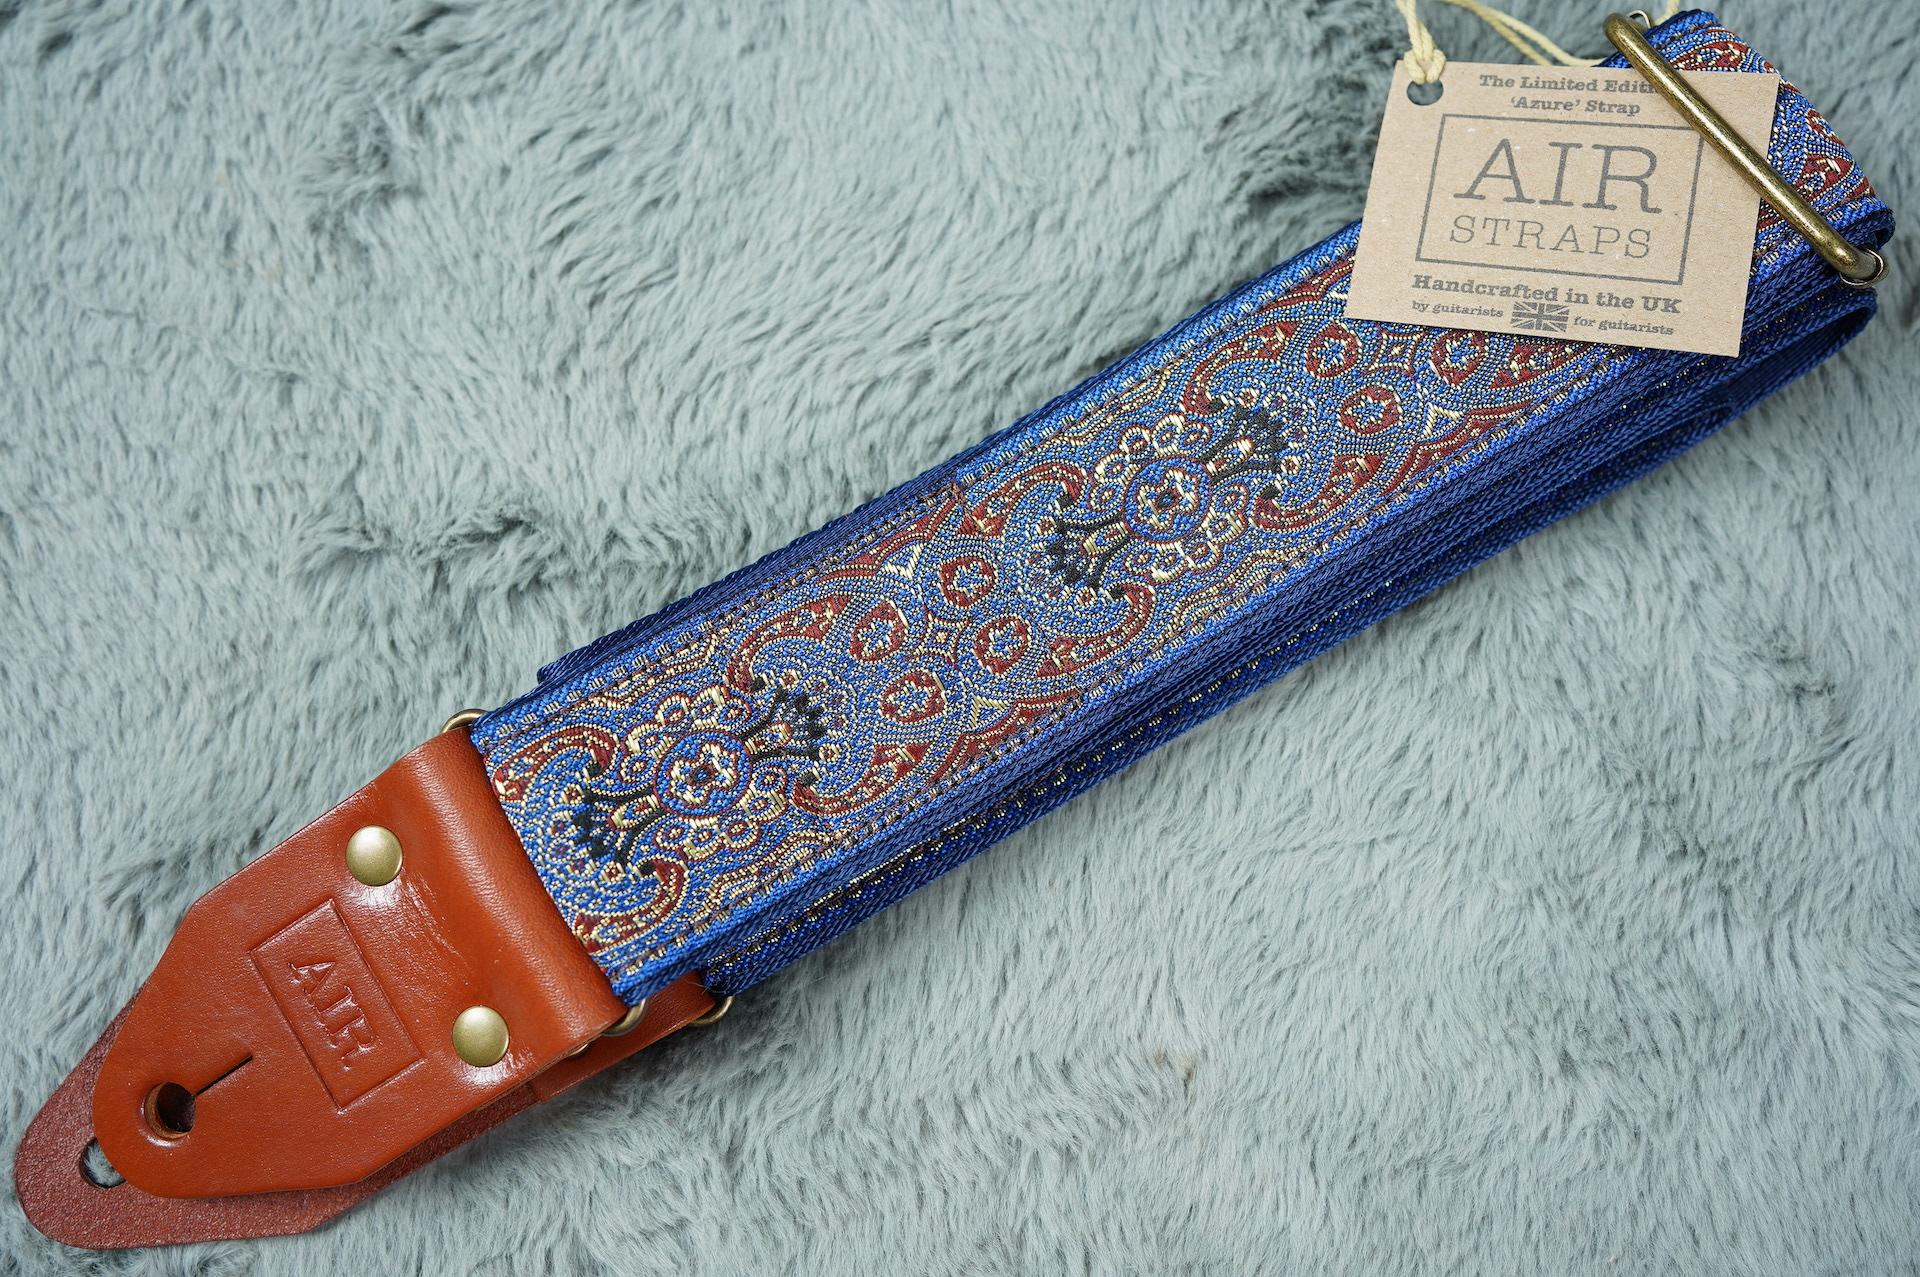 Air Straps Limited Edition 'Azure' Guitar Strap